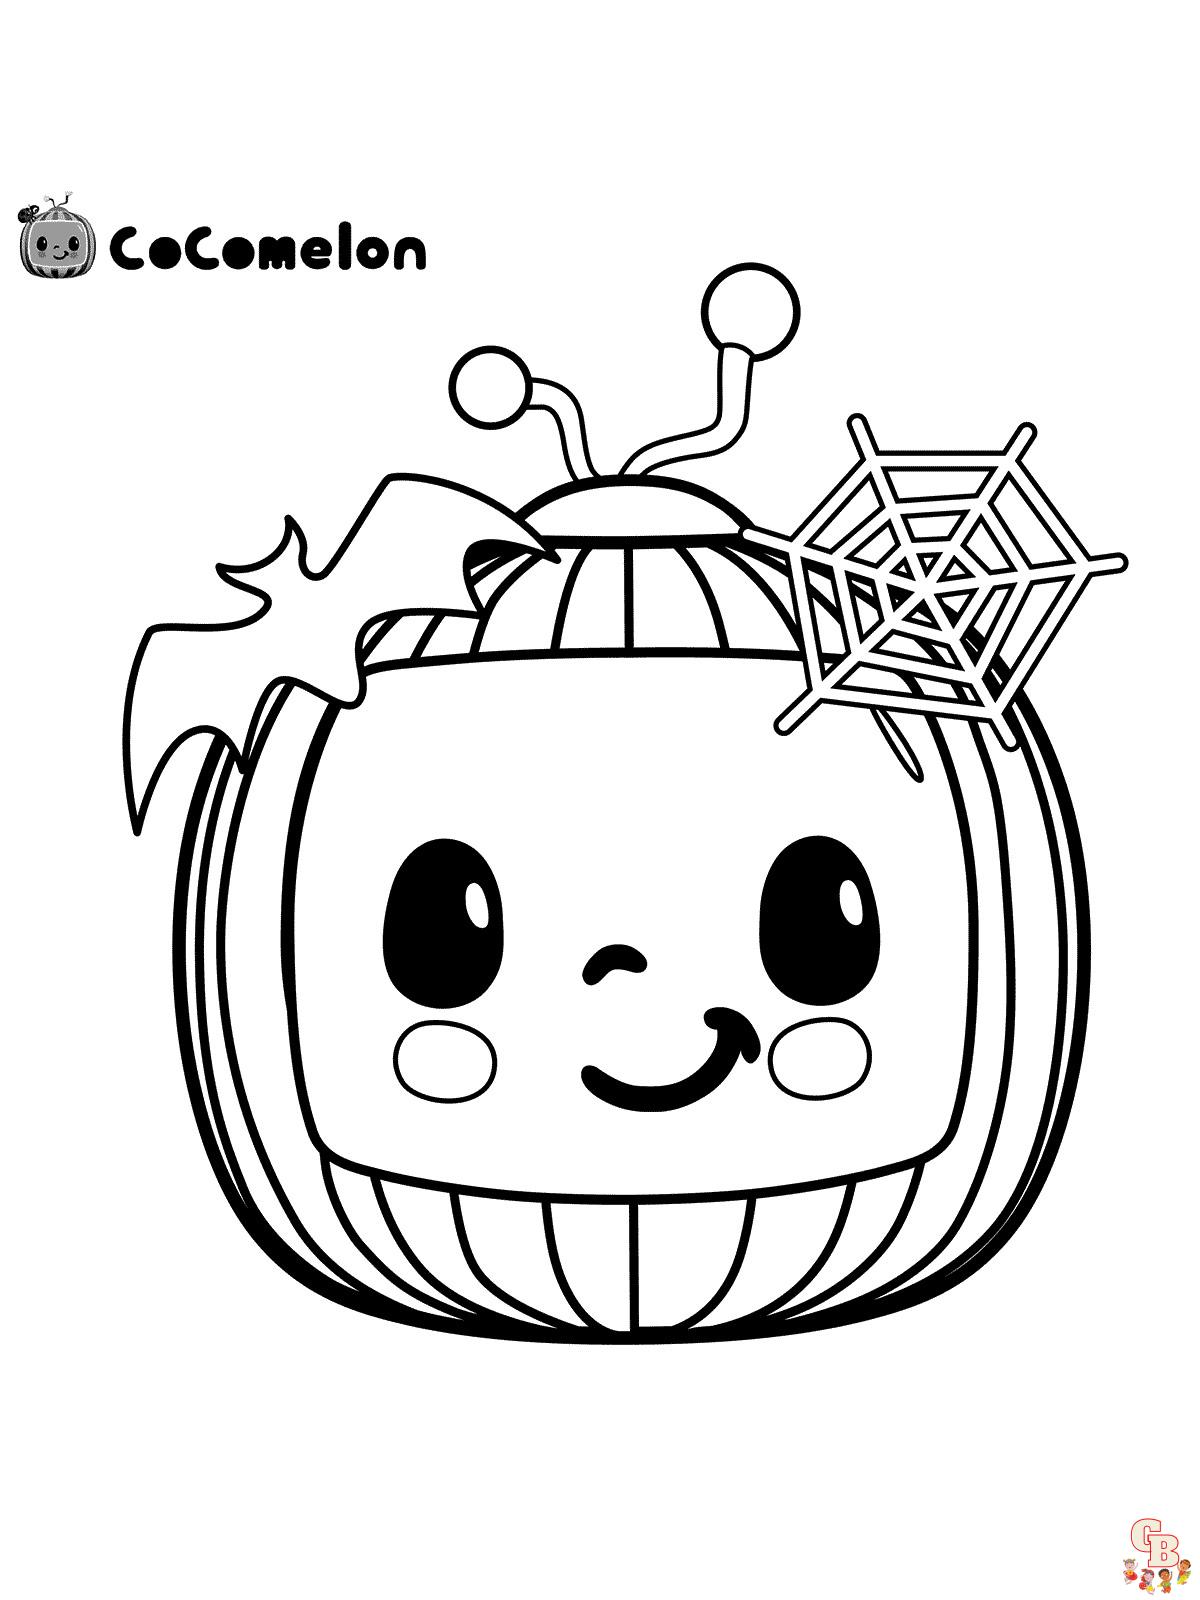 Cocomelon Coloring Pages 23